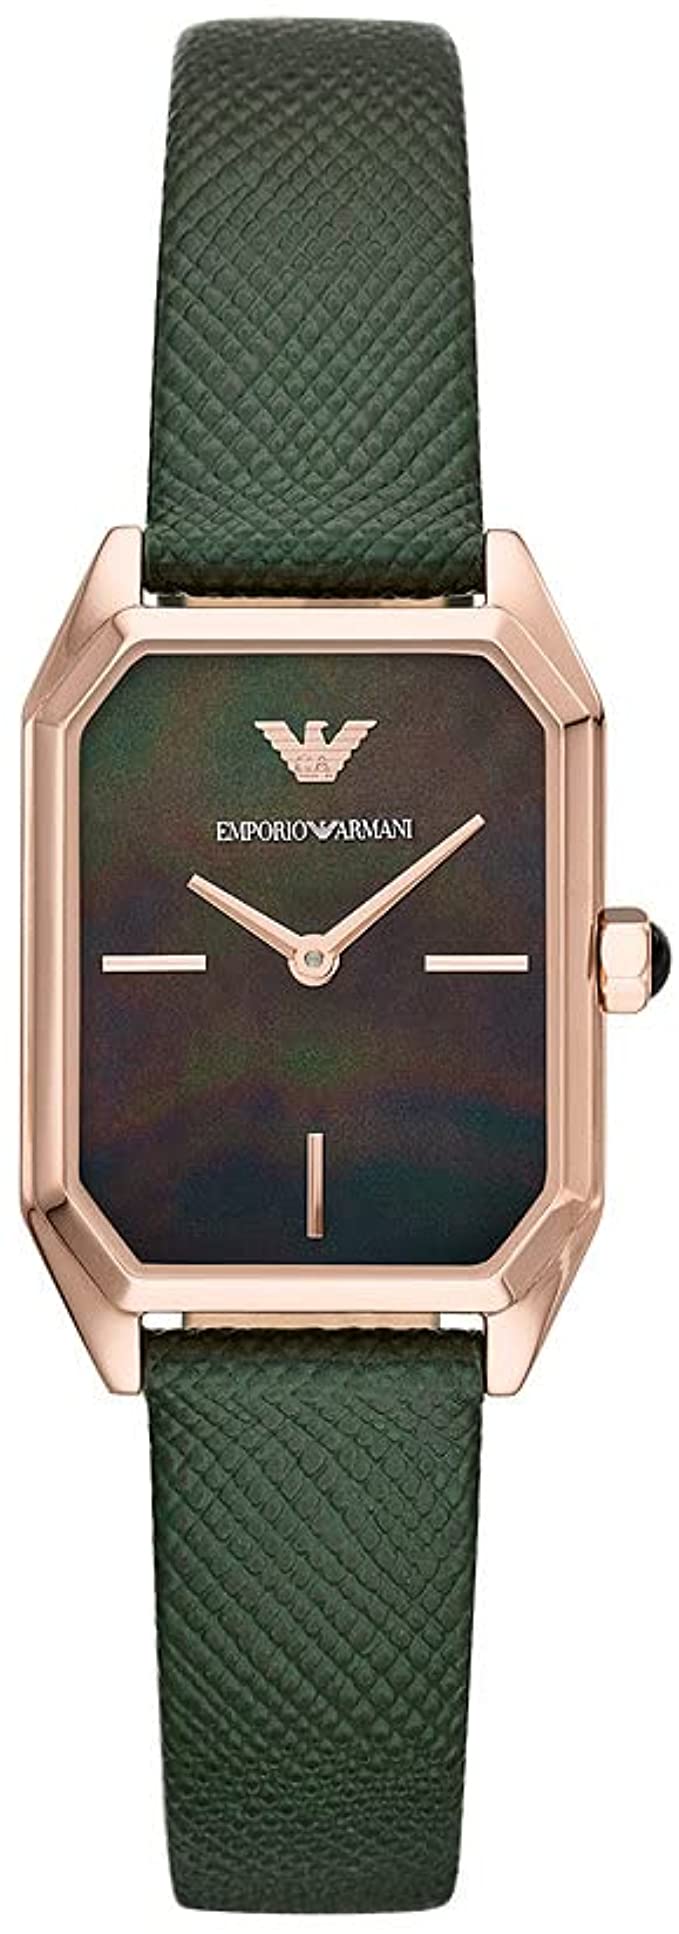 Emporio Armani Ladies Automatic Watch Gioia Green AR11149 - Watches & Crystals